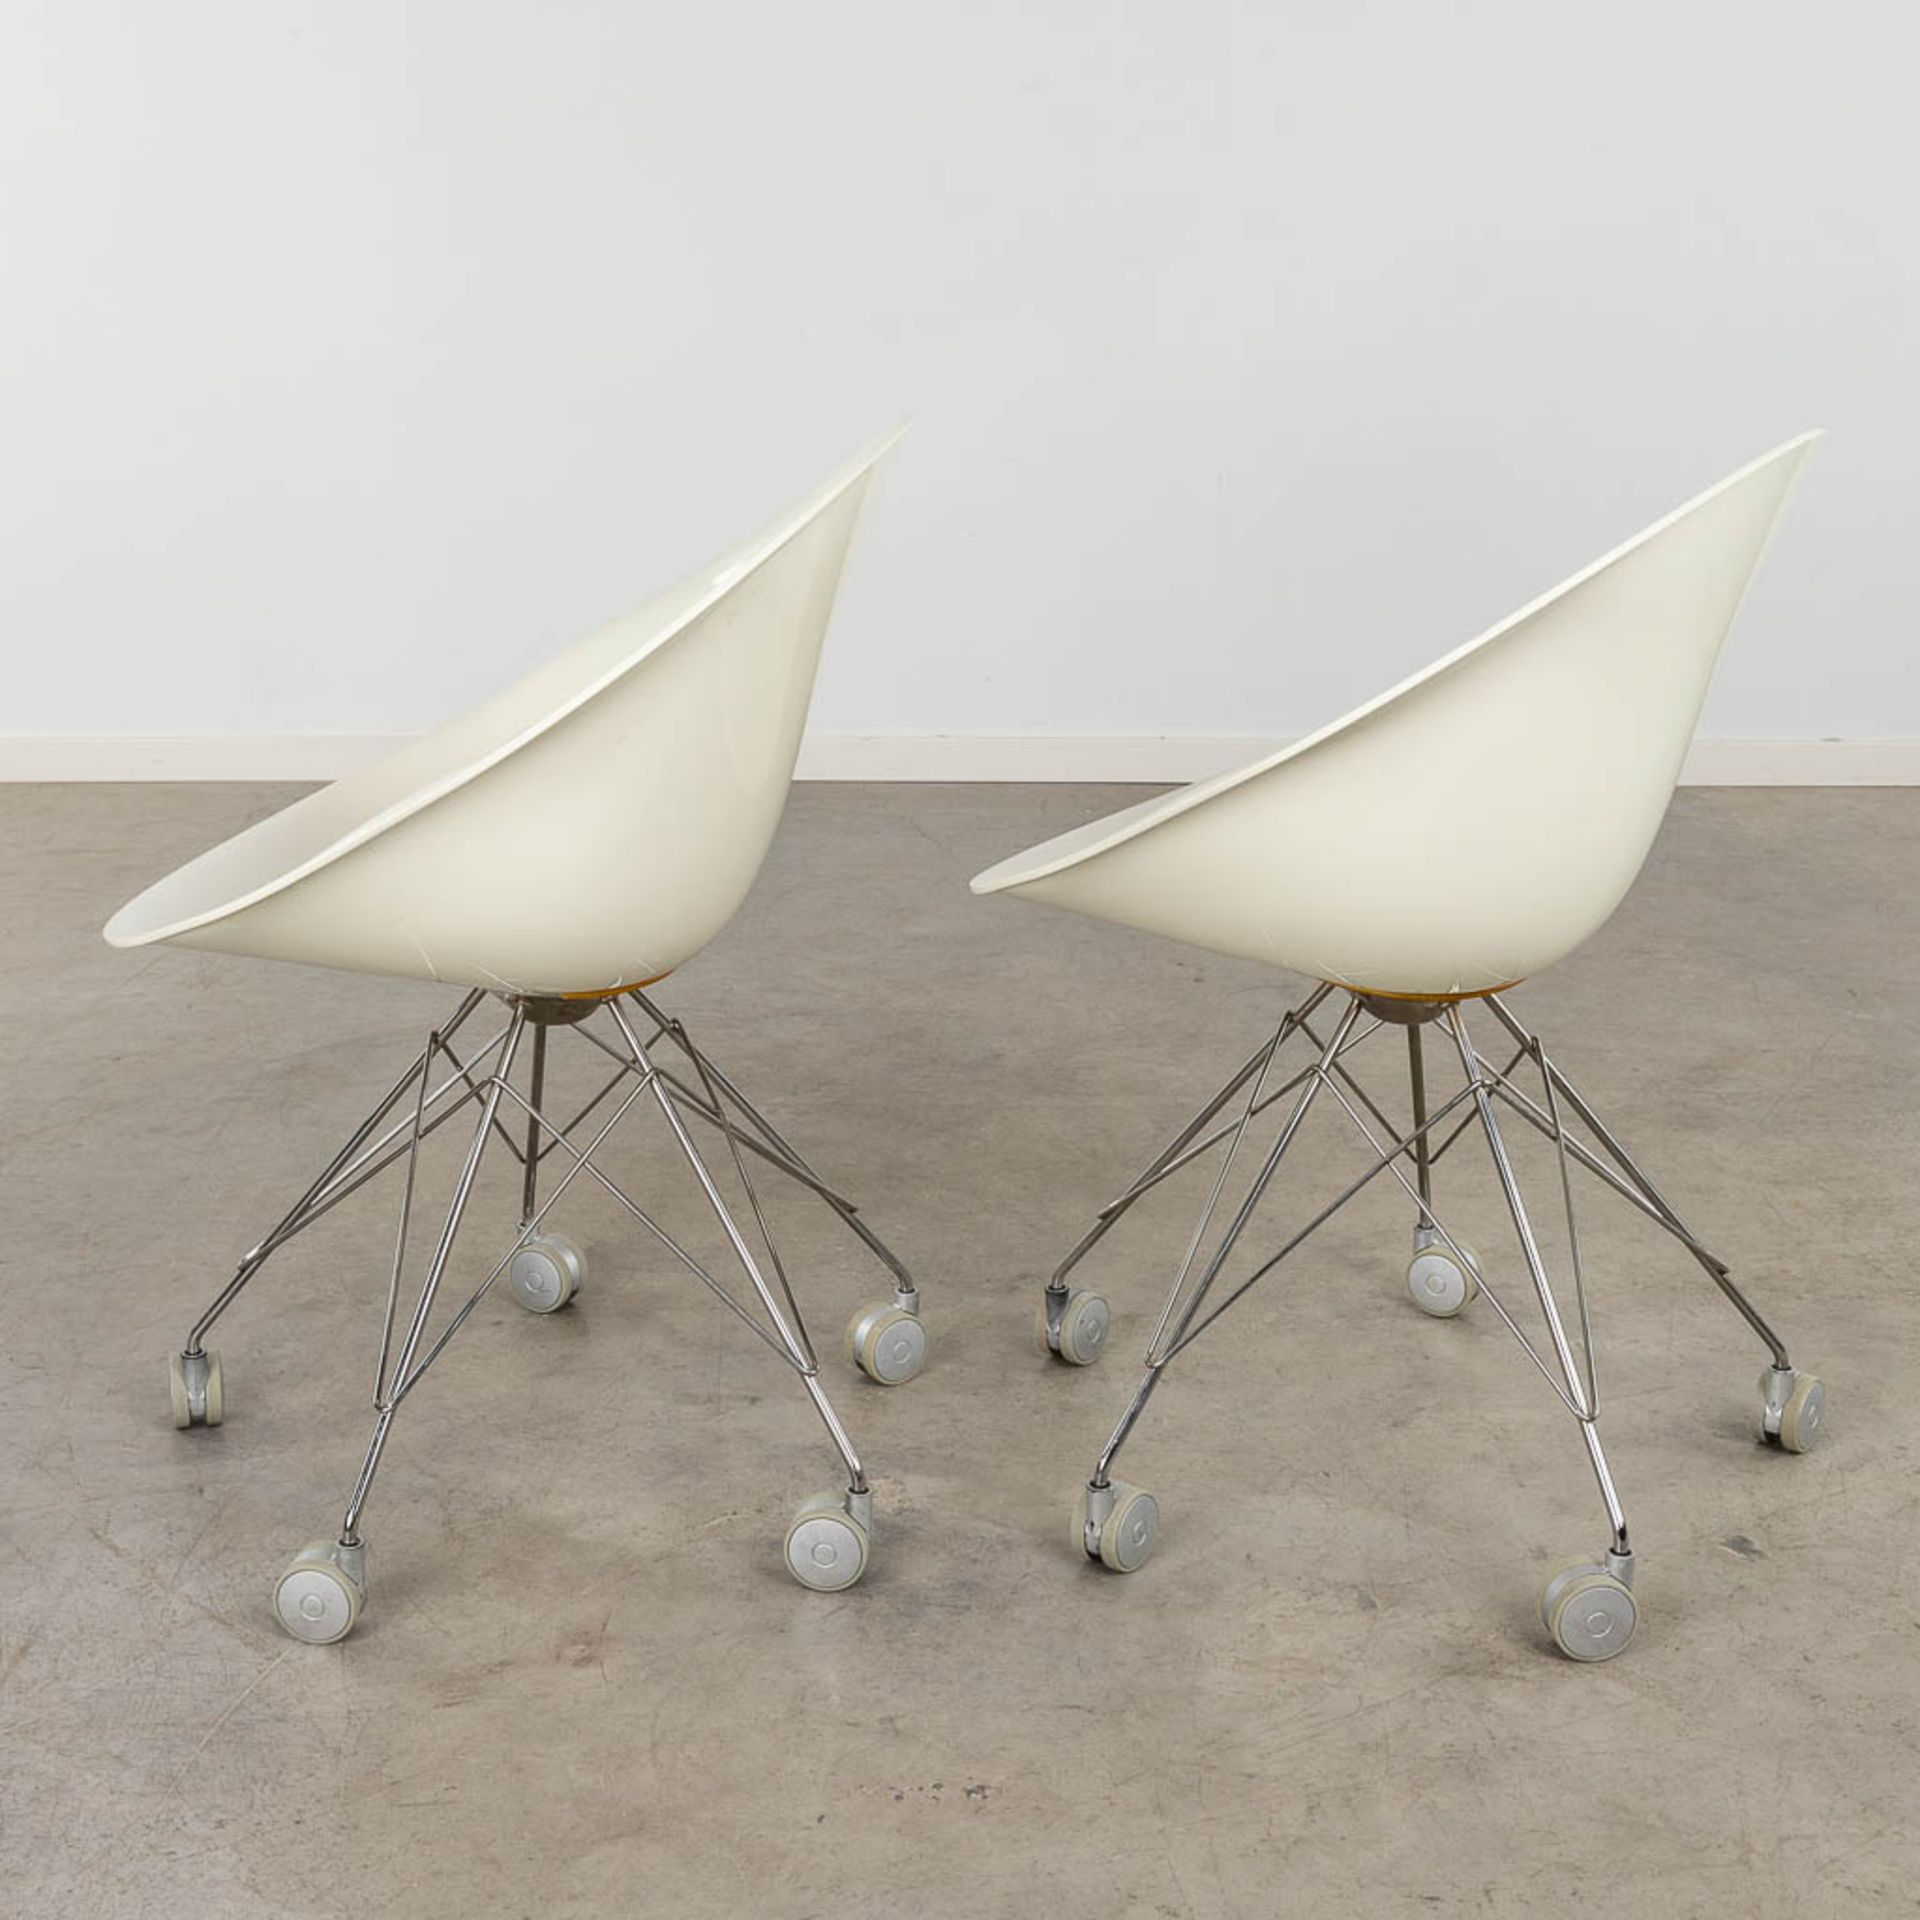 Philippe STARCK (1949) 'Ero' for Kartell, two office chairs. (D:59 x W:62 x H:82 cm) - Image 6 of 14